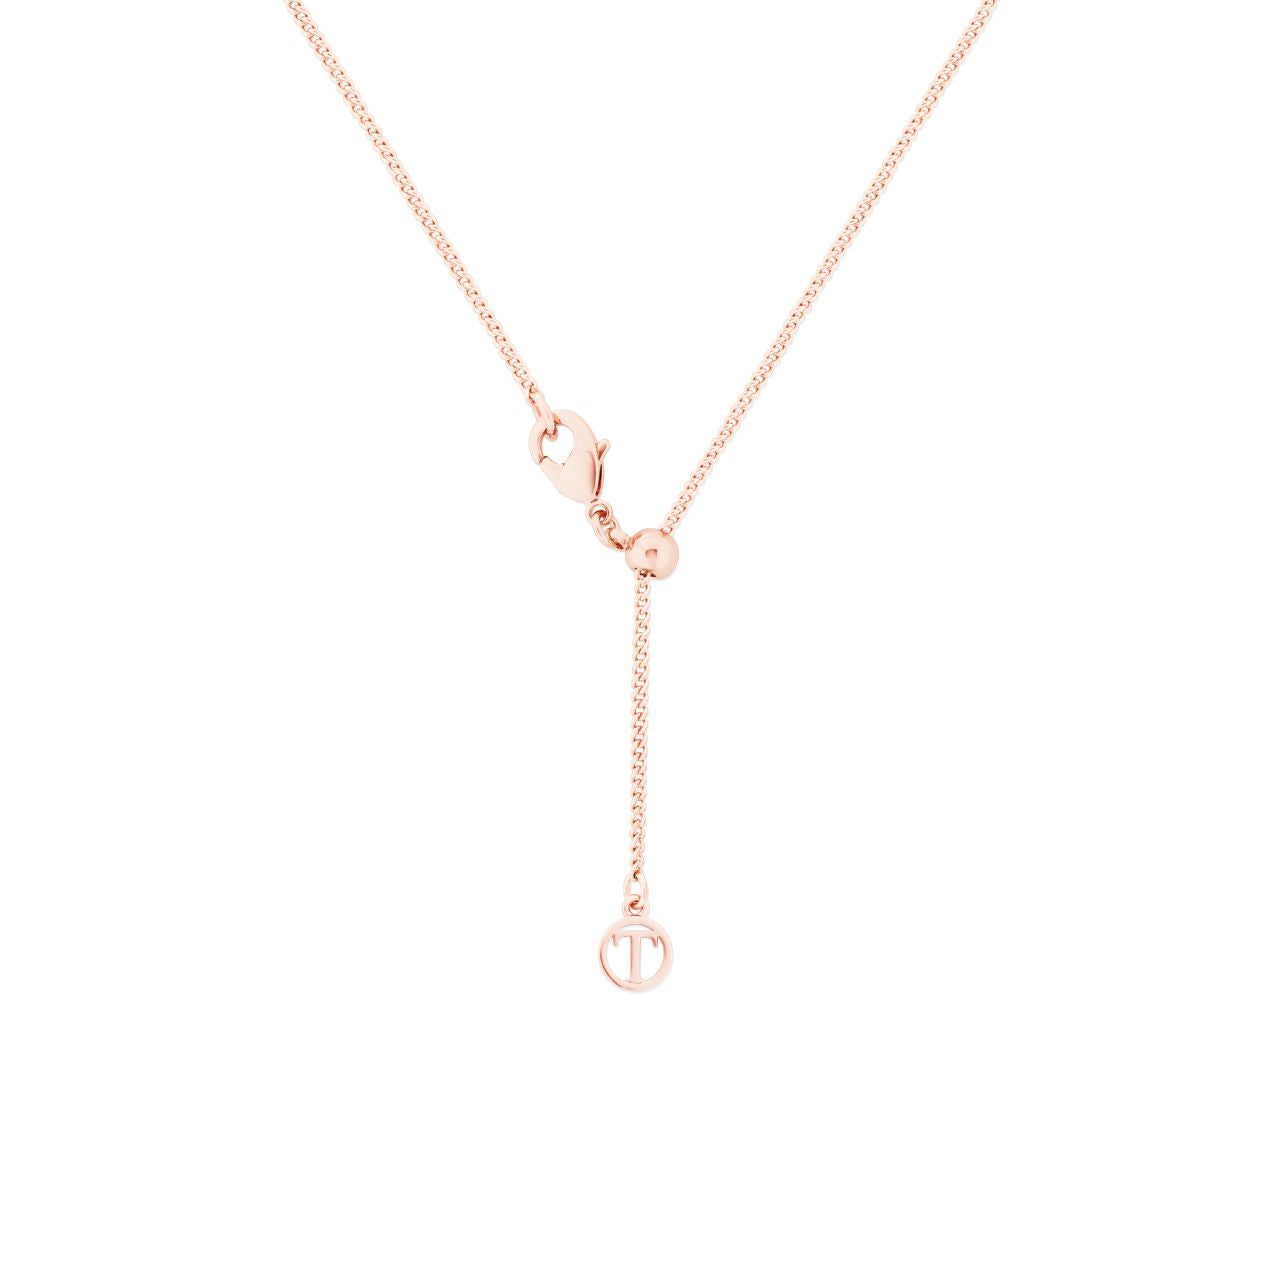 Circle Pave Rose Gold Pendant by Tipperary Crystal The Tipperary Circle Pave Rose Gold Pendant is an elegant piece of jewelry with a delicate design. Crafted by Tipperary Crystal, this pendant has a luxurious rose gold finish and is encrusted with sparkling stones. Wear it for any special occasion to add a unique touch to your look.